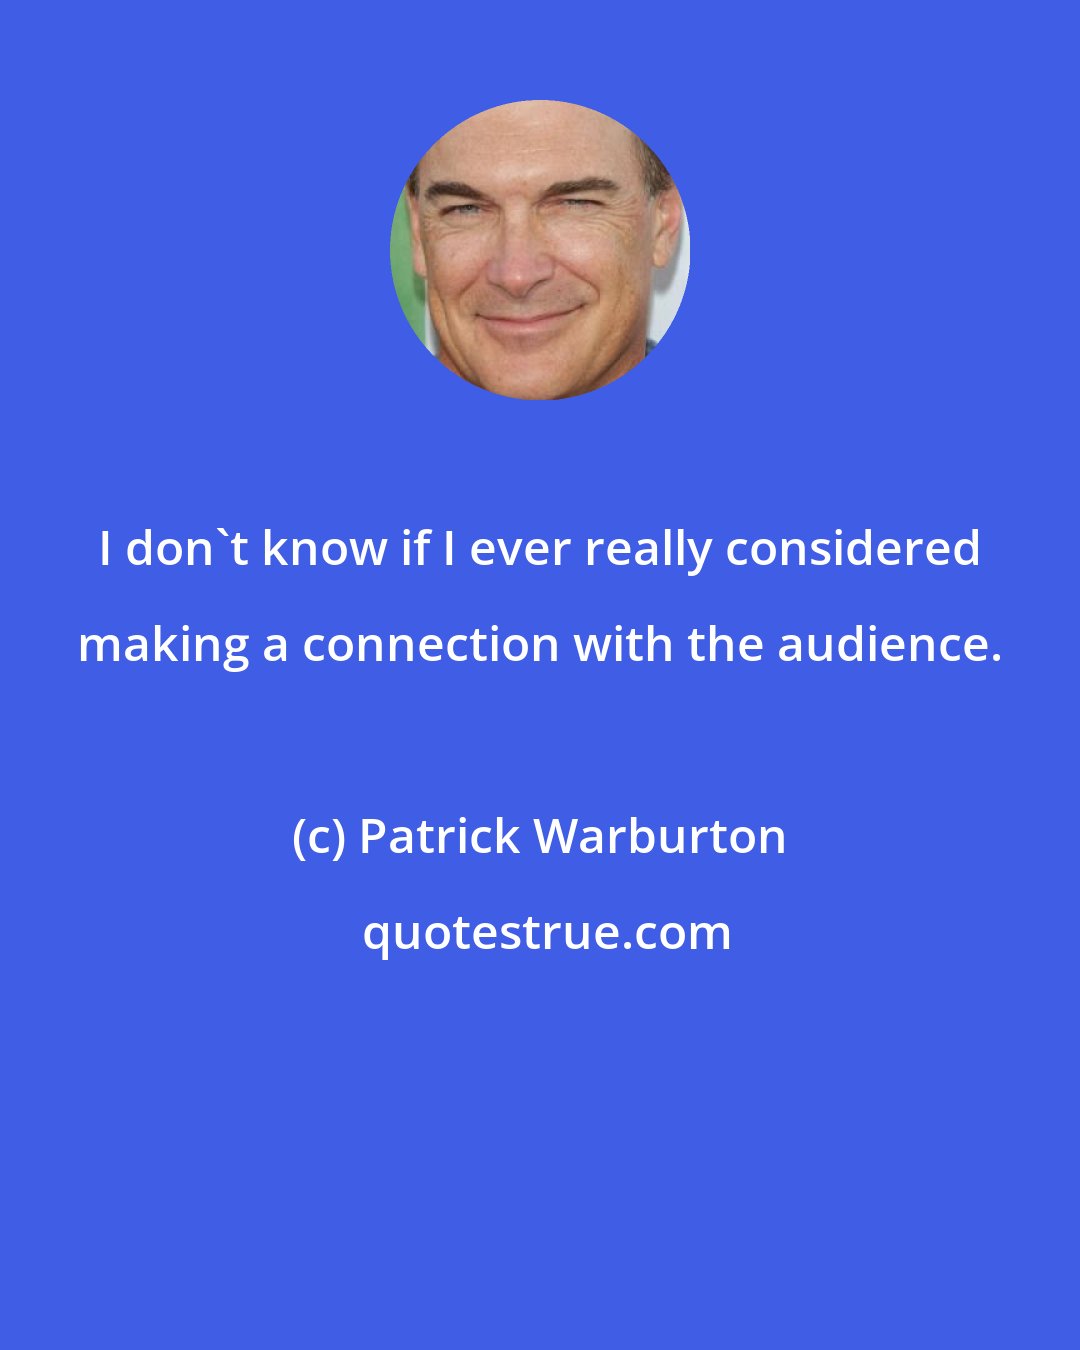 Patrick Warburton: I don't know if I ever really considered making a connection with the audience.